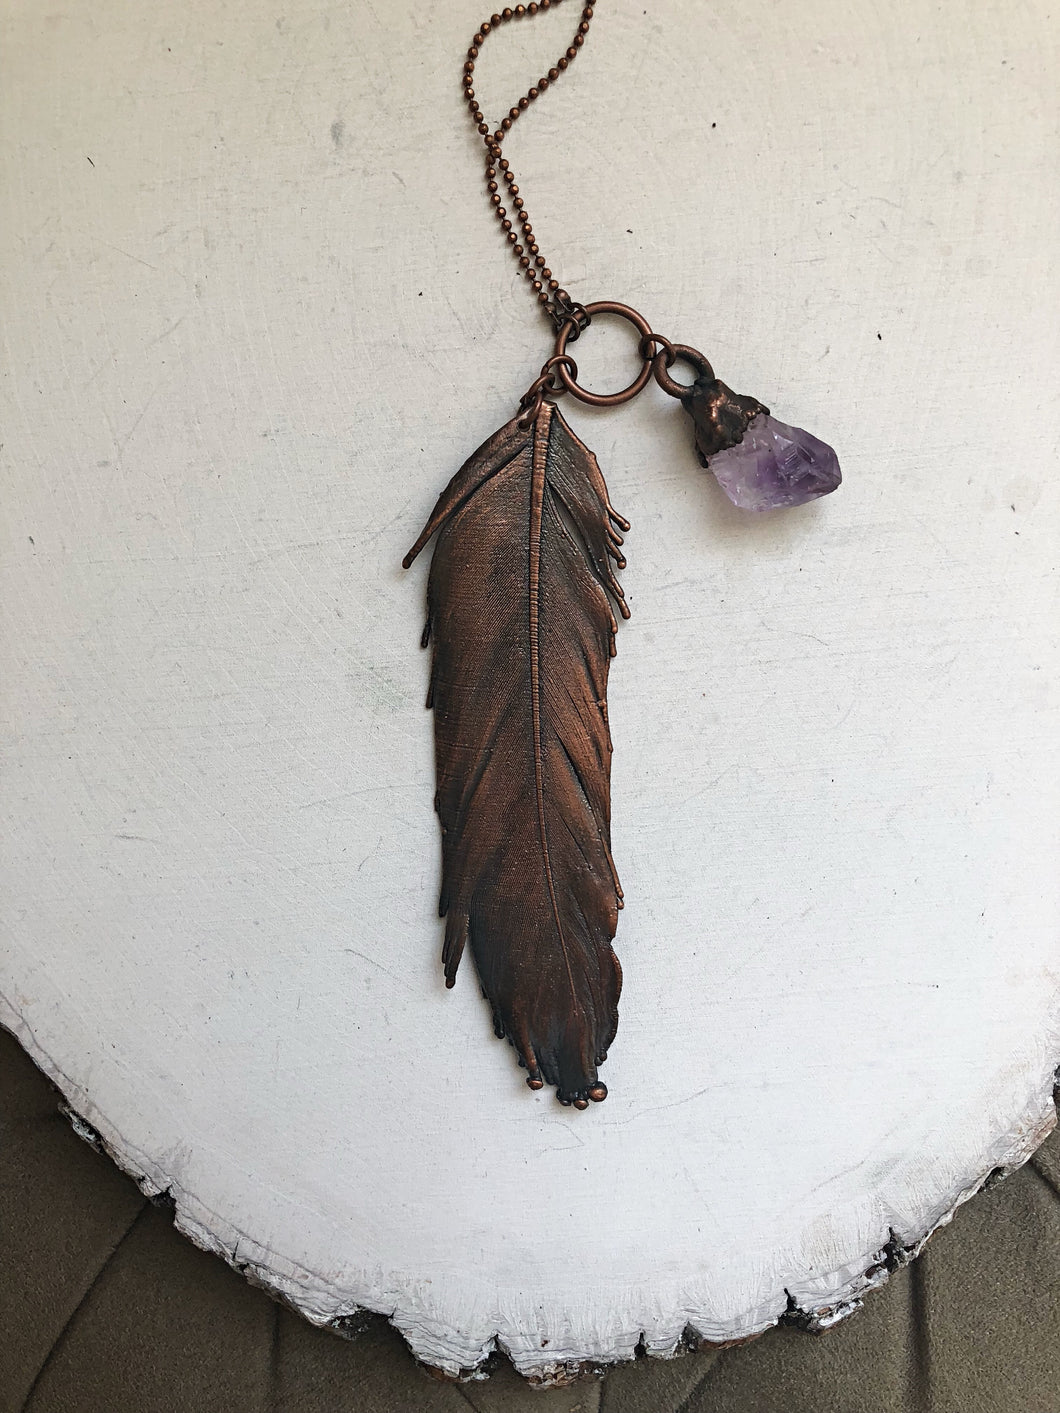 Electroformed Feather Necklace with Raw Amethyst Point - Ready to Ship (5/17 Update)